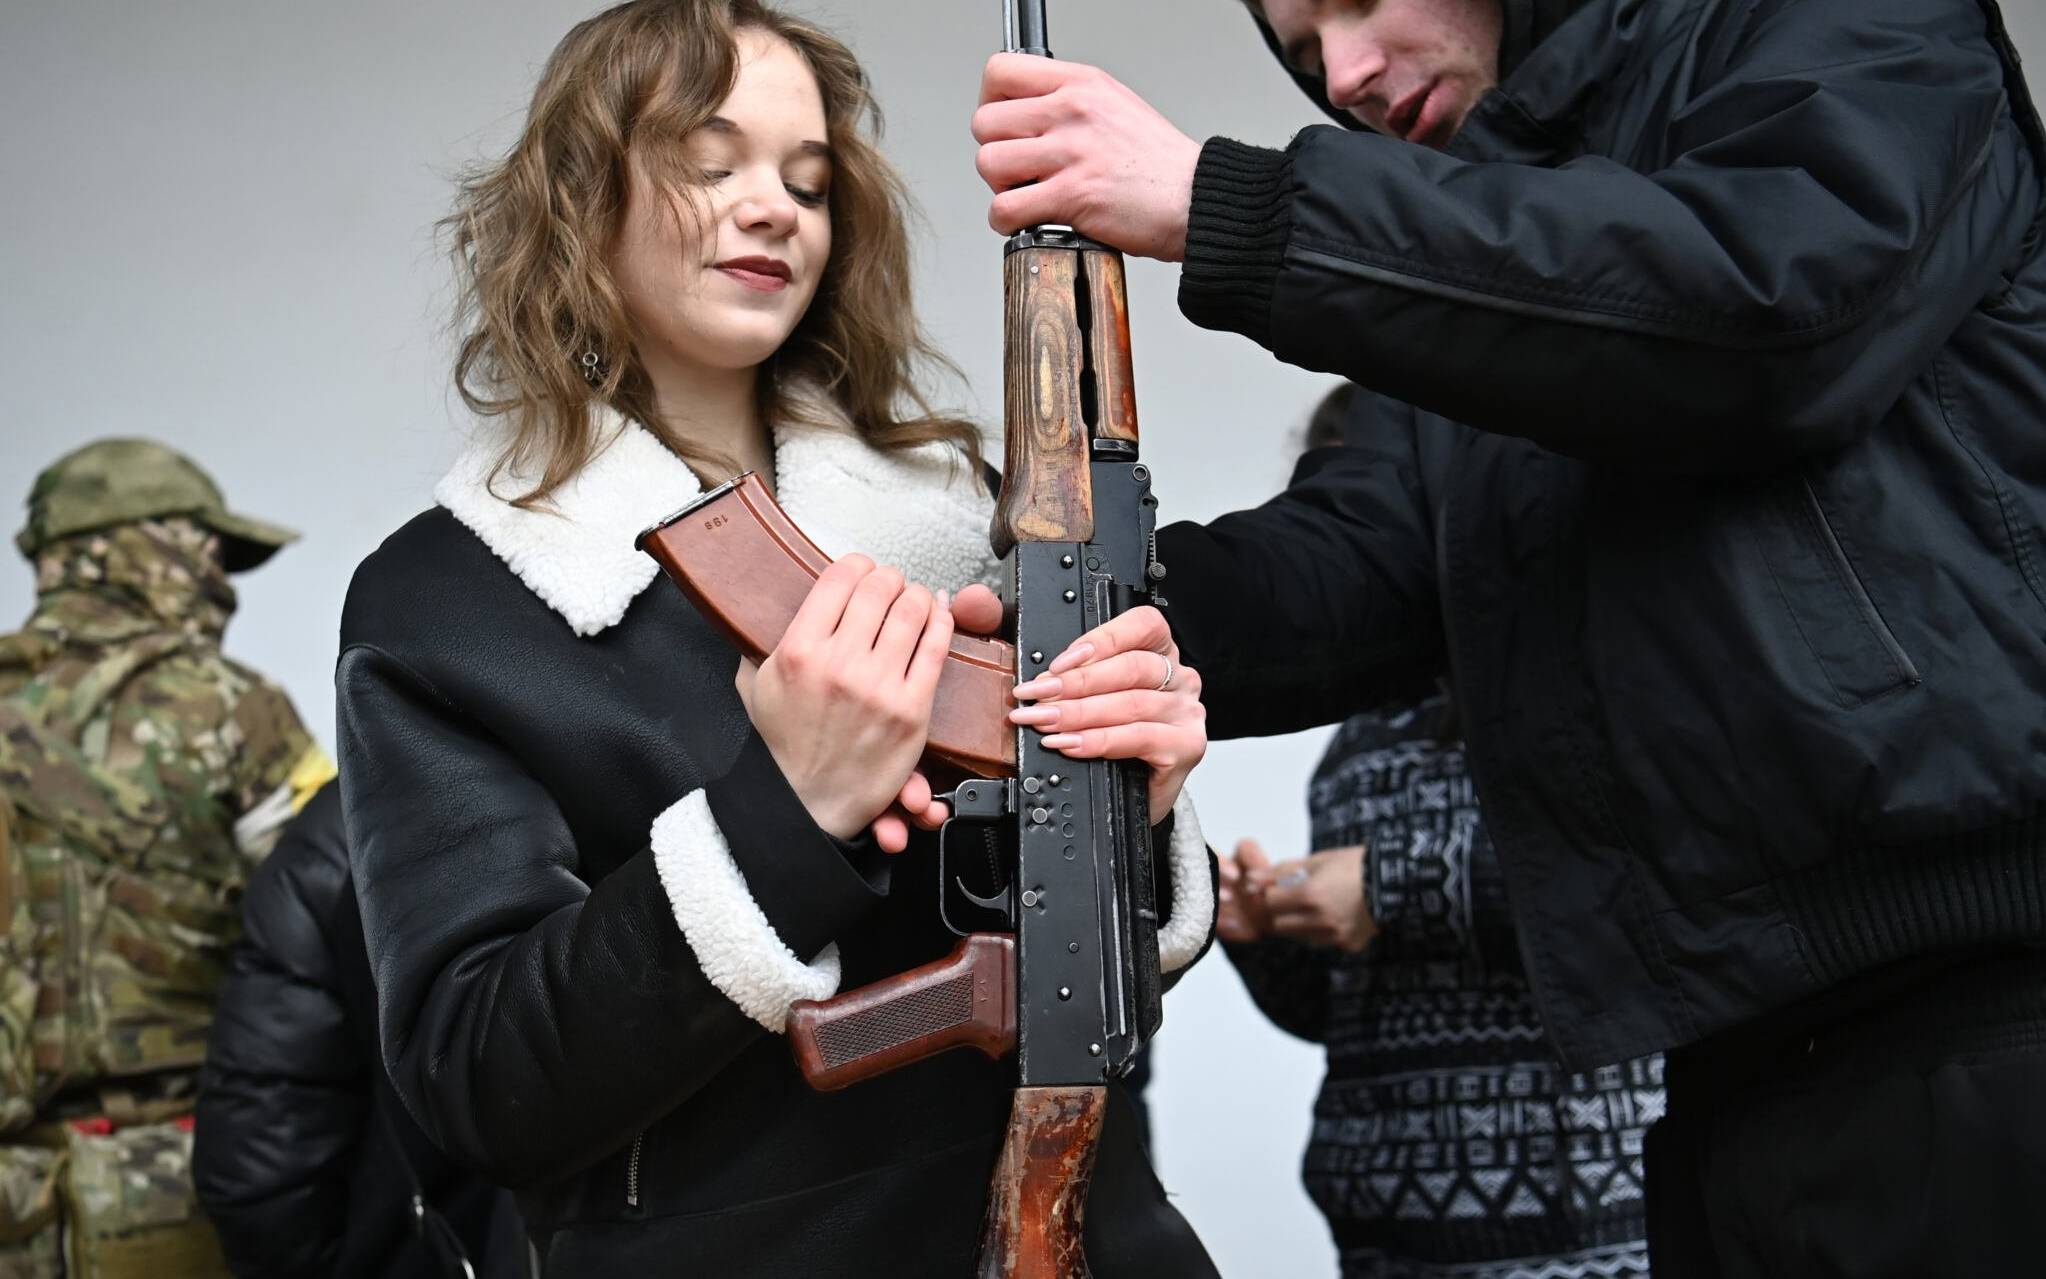 A woman learns how to use an AK-47 assault rifle during a civilians self-defence course in the outskirts of Lviv, western Ukraine, on March 4, 2022. - The Russian army occupied on March 4, 2022 the Ukrainian nuclear power plant of Zaporozhie (south), the largest in Europe, where bombings in the night have raised fears of a disaster as more than 1.2 million people have fled Ukraine into neighbouring countries since Russia launched its full-scale invasion on February 24, United Nations figures showed on March 4, 2022. (Photo by Daniel LEAL / AFP)